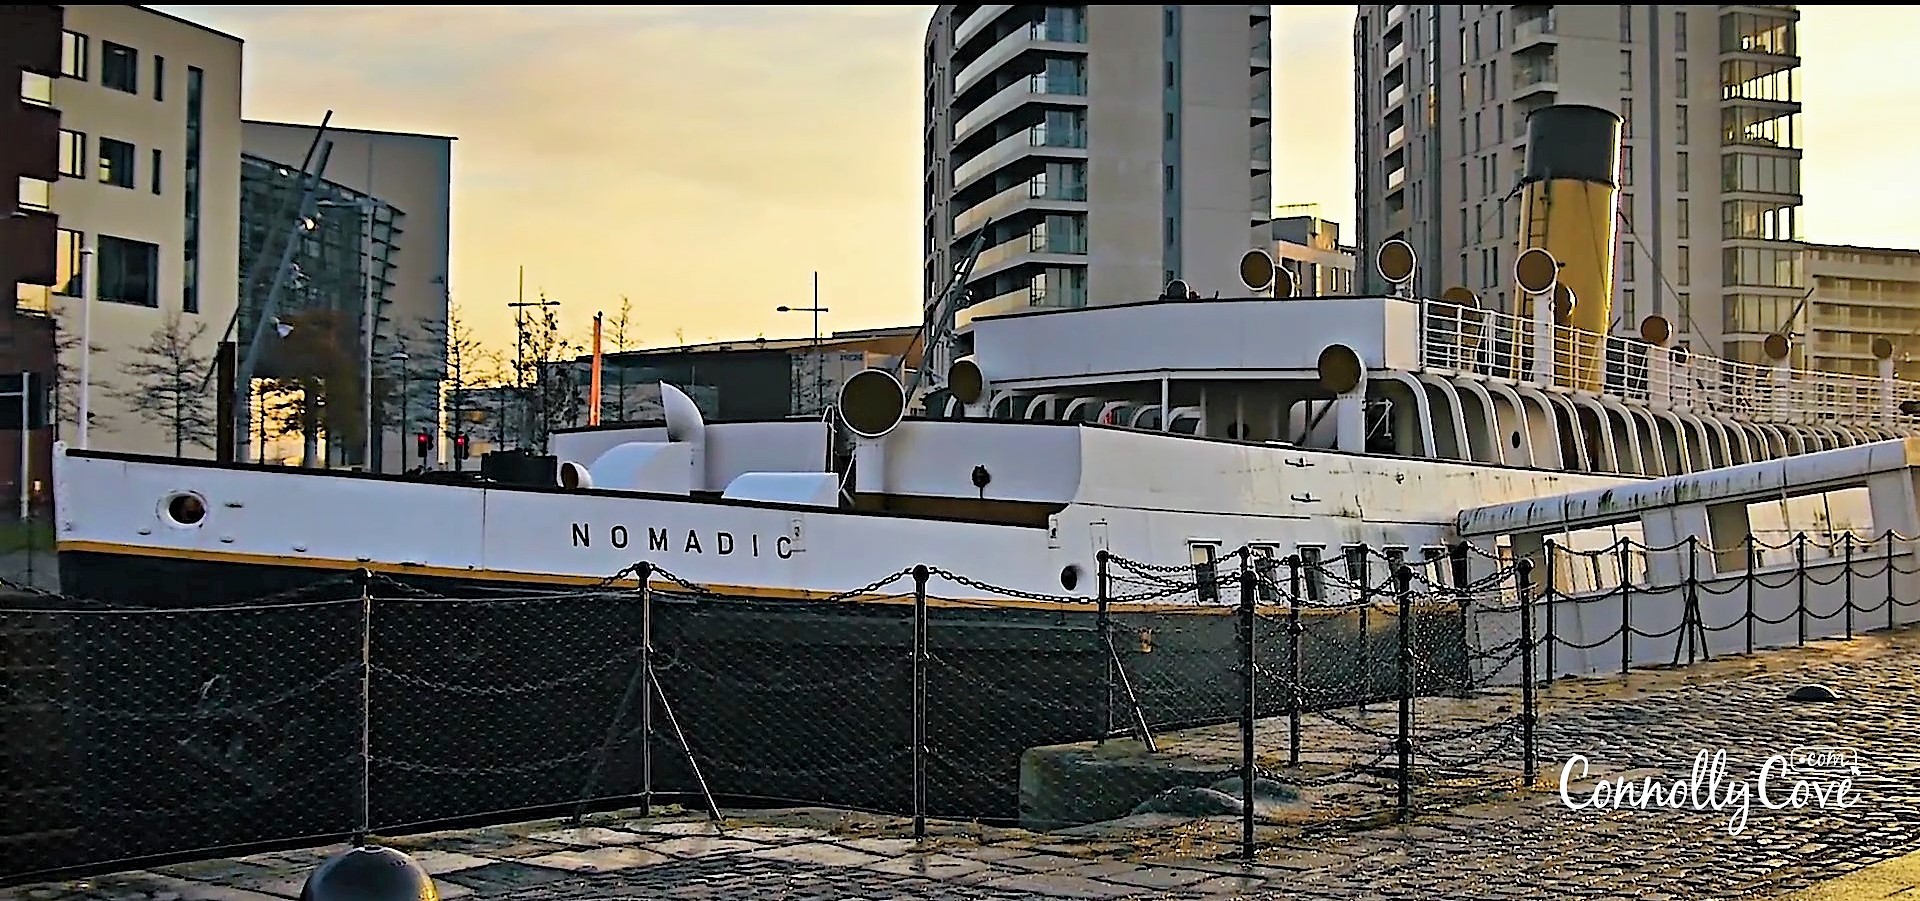 ss nomadic Check out our ultimate guide to things to do in Belfast, we have made note of all the best attractions that you need to visit while on your visit to Belfast, Northern Ireland. So much to see and you won't be bored in Belfast we can promise that!